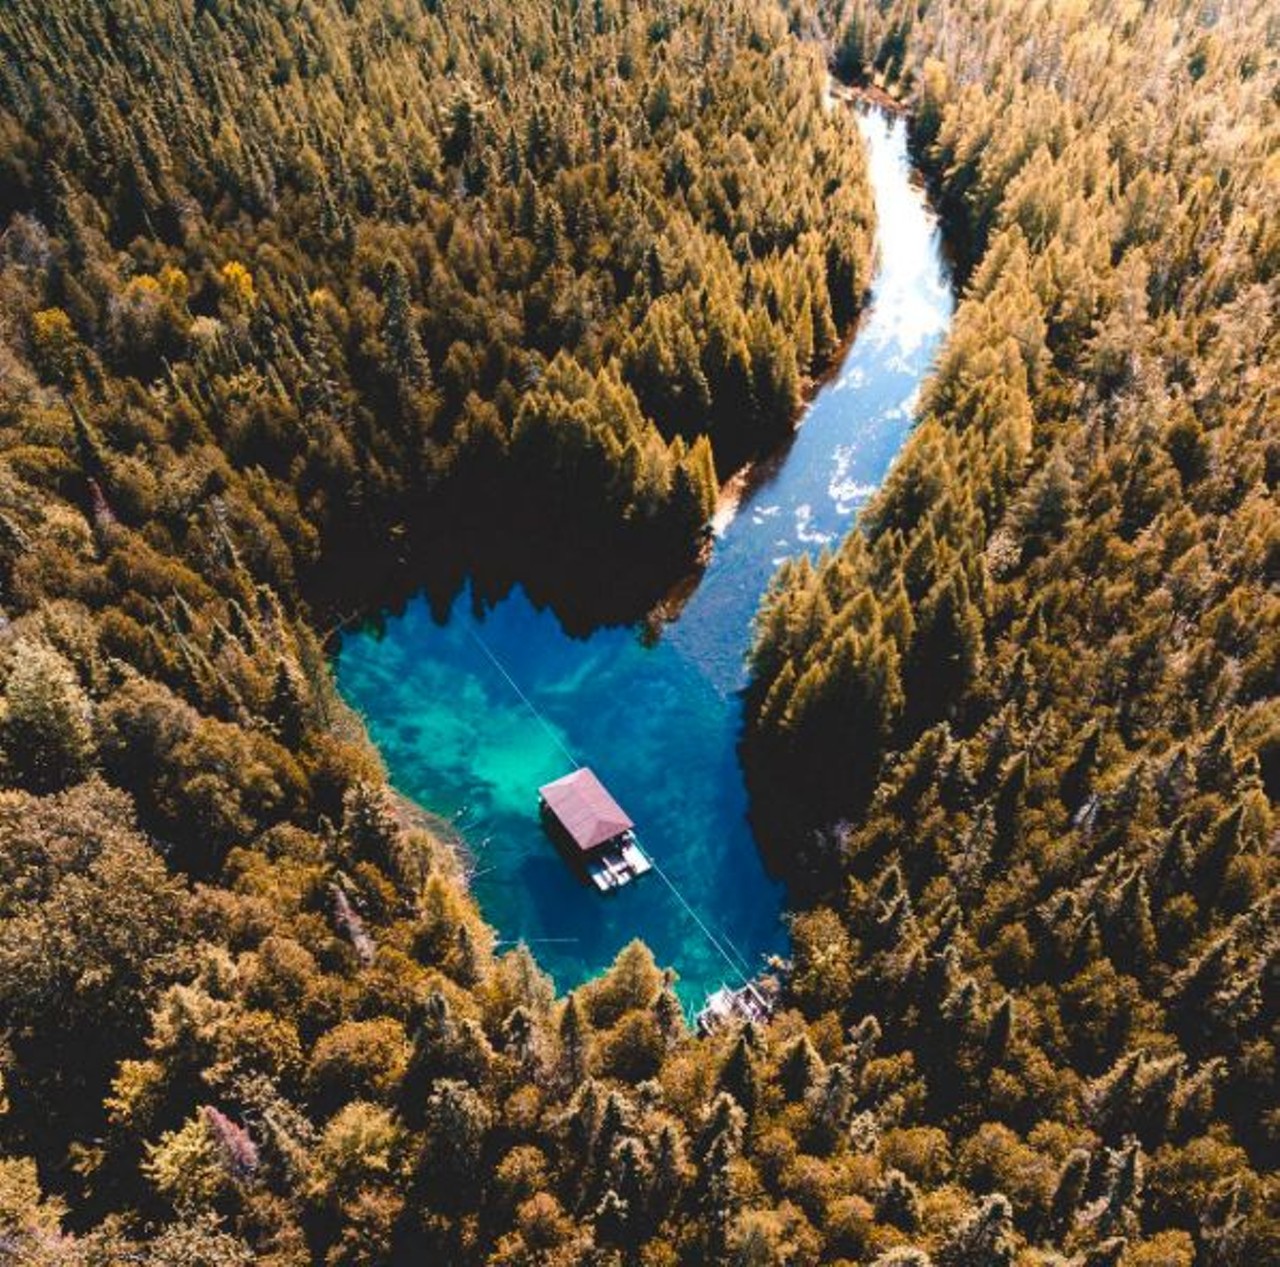 Kitch-iti-kipi Manistique 
Better known as the Big Spring, this 200-by-40-foot body of freshwater is the largest of its kind in Michigan. Visitors may take a tour by raft across the crystal-clear water.
Photo via IG user @jaredevangelista